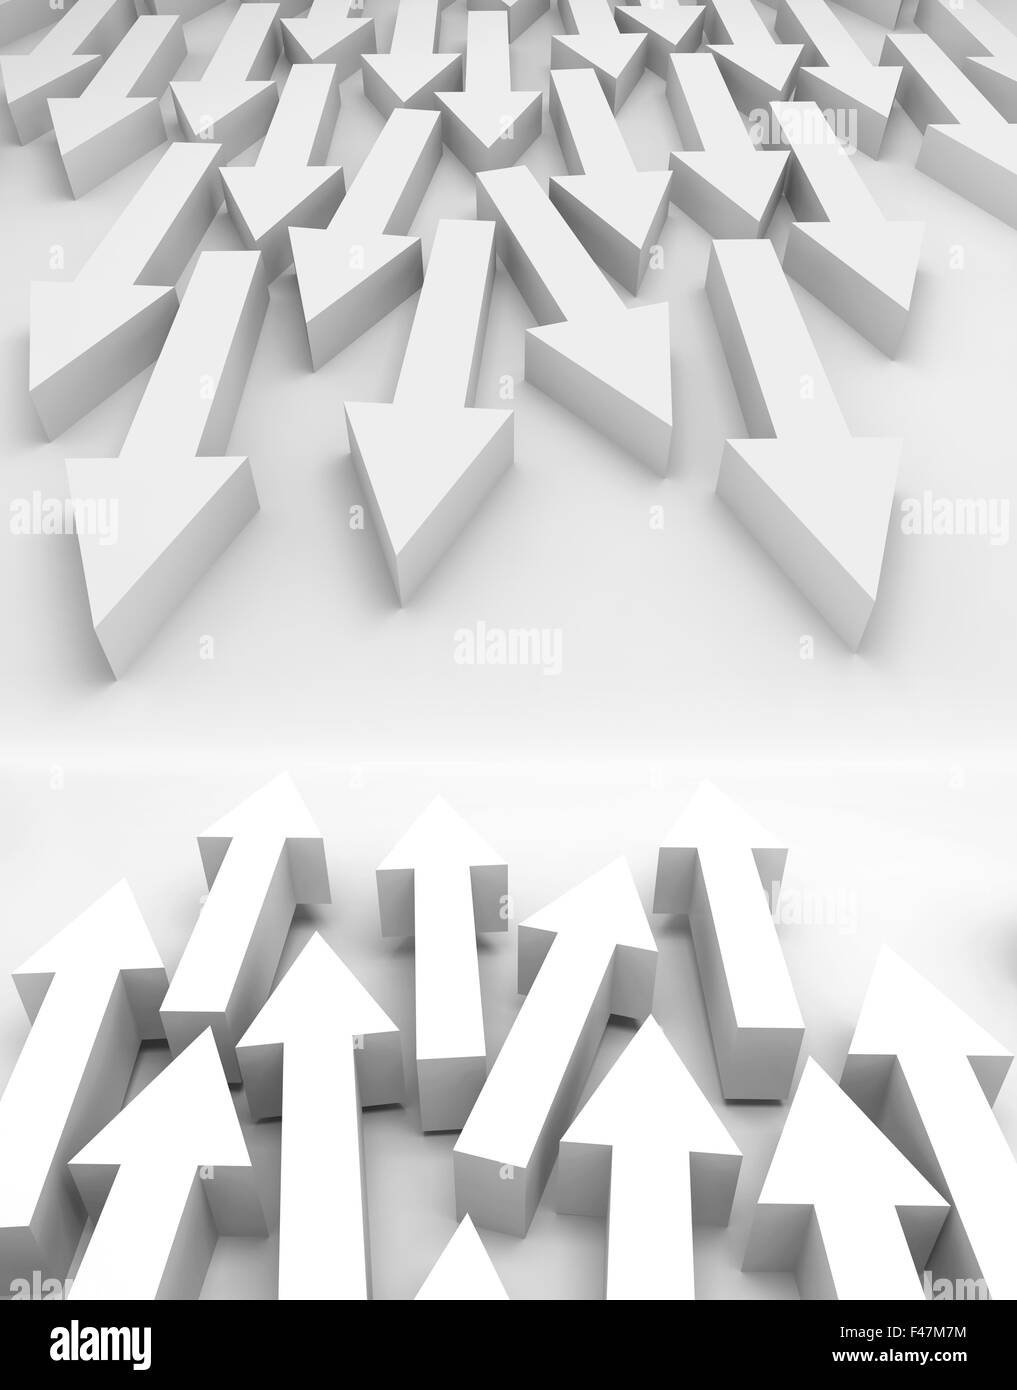 Abstract 3d illustration with large groups of white arrows going towards each other Stock Photo